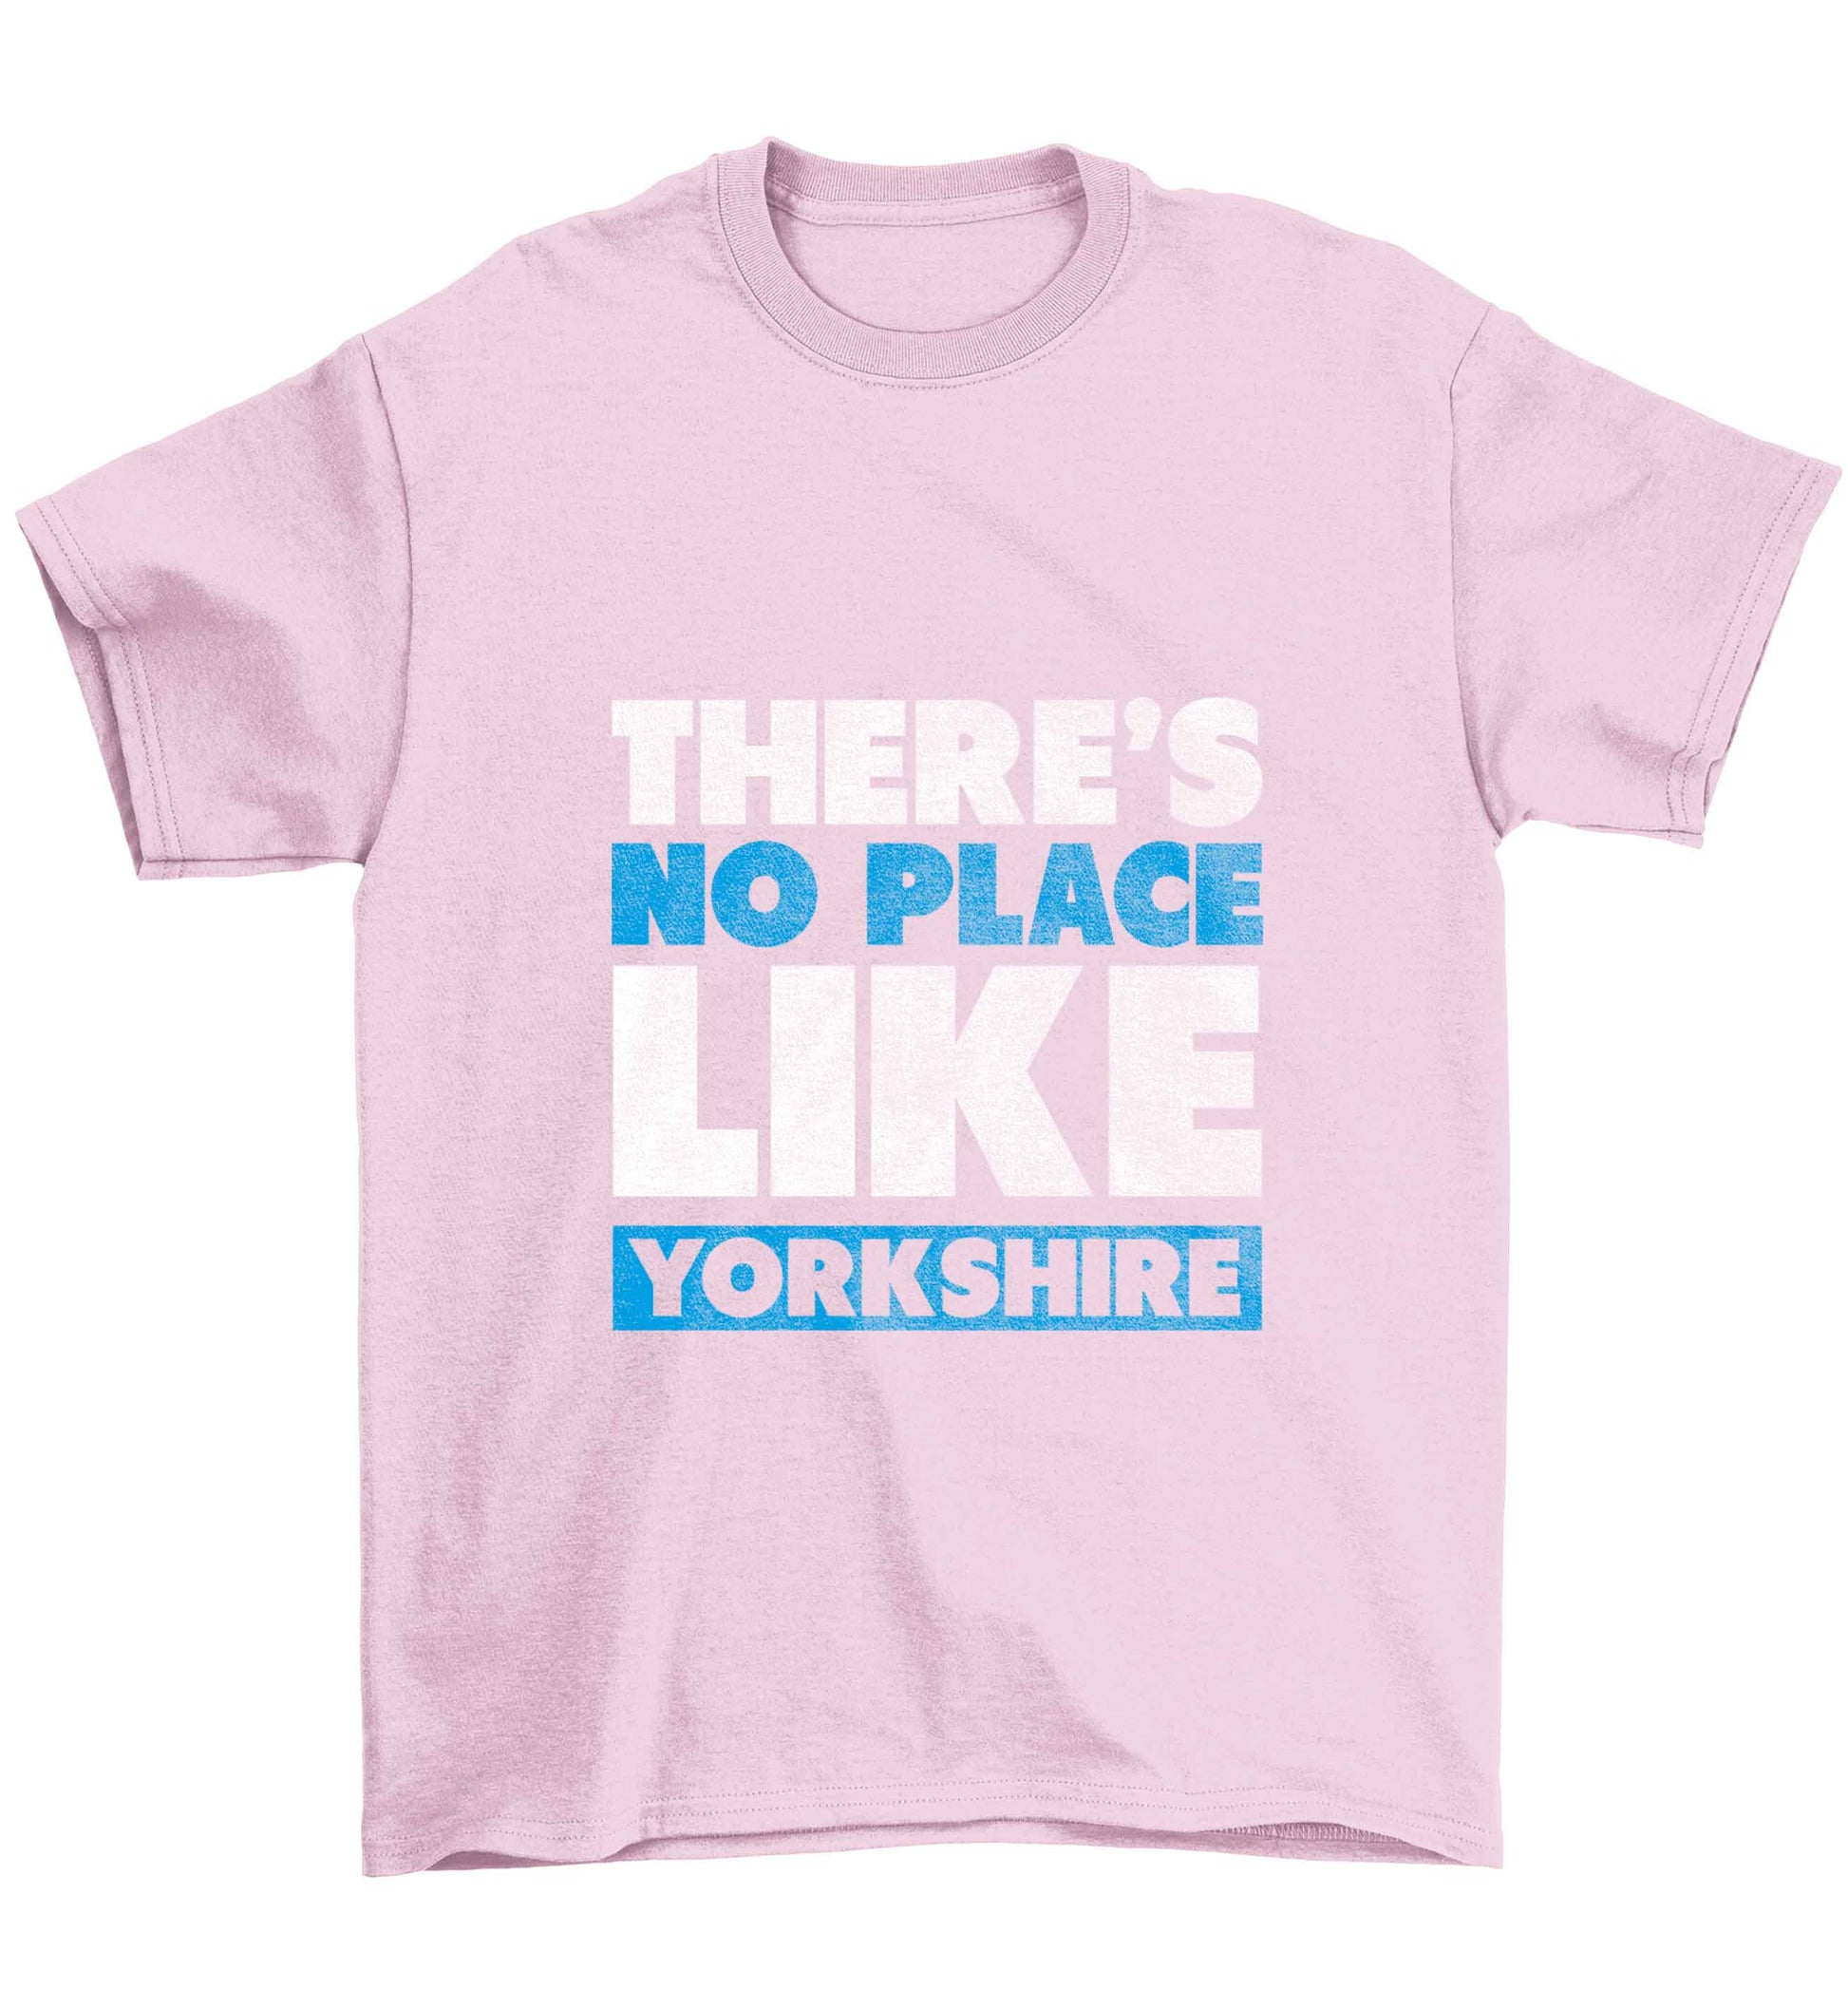 There's no place like Yorkshire Children's light pink Tshirt 12-13 Years